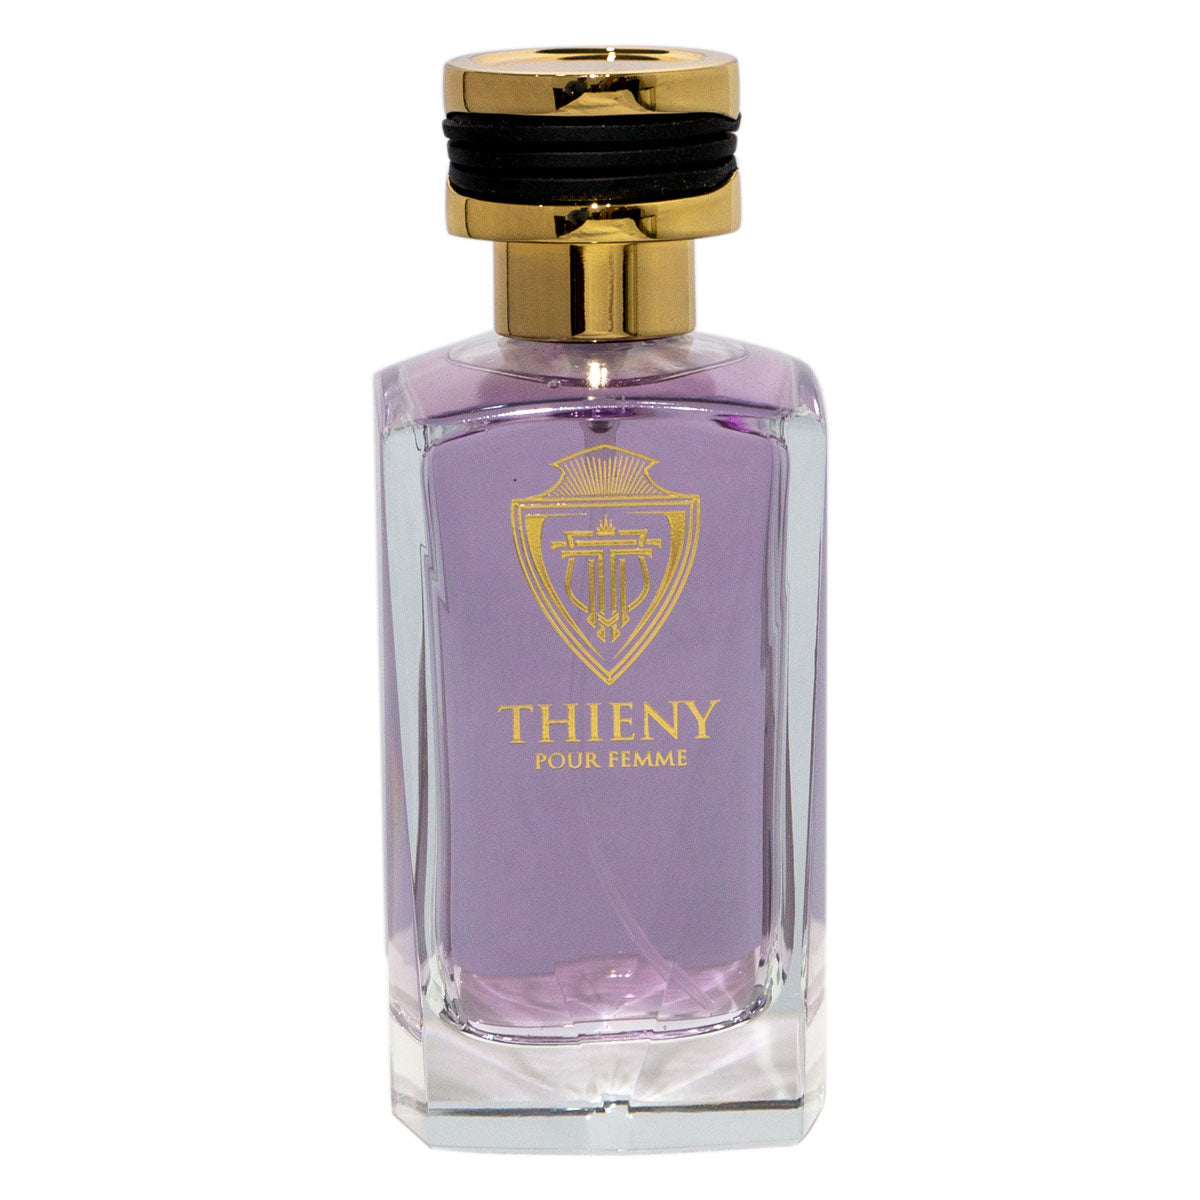 Orchid Perfumes Thieny Pour Femme (Pink) for Women EDP 100ml - samawa perfumes 